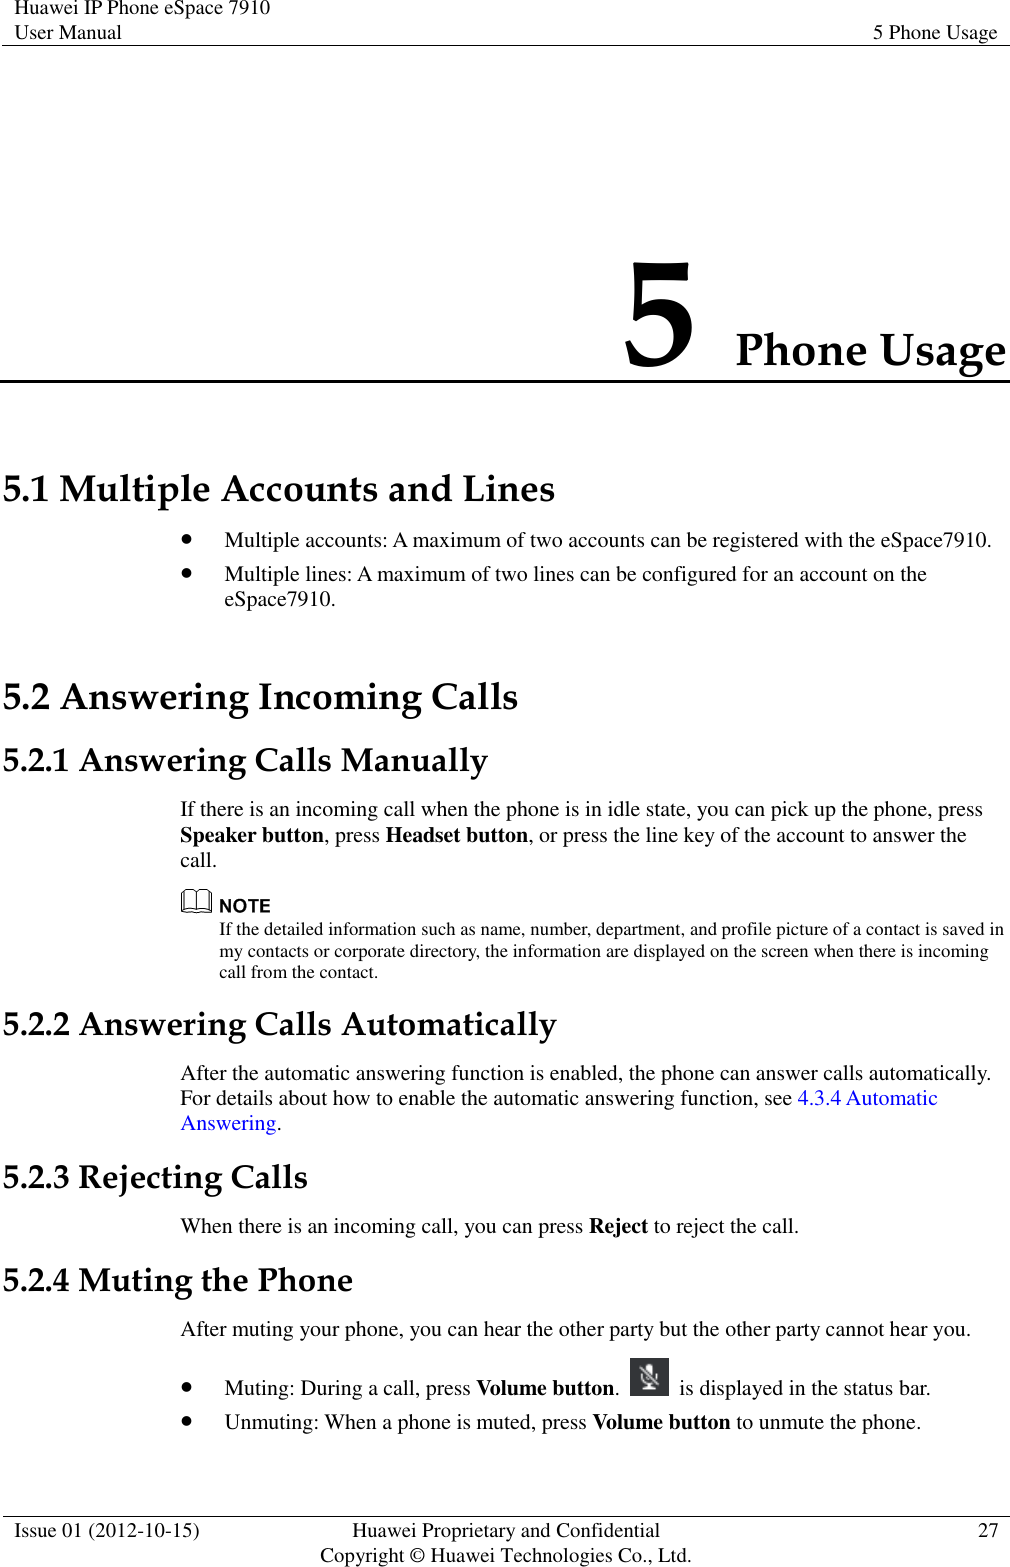 Huawei IP Phone eSpace 7910 User Manual 5 Phone Usage  Issue 01 (2012-10-15) Huawei Proprietary and Confidential                                     Copyright © Huawei Technologies Co., Ltd. 27  5 Phone Usage 5.1 Multiple Accounts and Lines  Multiple accounts: A maximum of two accounts can be registered with the eSpace7910.  Multiple lines: A maximum of two lines can be configured for an account on the eSpace7910. 5.2 Answering Incoming Calls 5.2.1 Answering Calls Manually If there is an incoming call when the phone is in idle state, you can pick up the phone, press Speaker button, press Headset button, or press the line key of the account to answer the call.  If the detailed information such as name, number, department, and profile picture of a contact is saved in my contacts or corporate directory, the information are displayed on the screen when there is incoming call from the contact. 5.2.2 Answering Calls Automatically After the automatic answering function is enabled, the phone can answer calls automatically. For details about how to enable the automatic answering function, see 4.3.4 Automatic Answering. 5.2.3 Rejecting Calls When there is an incoming call, you can press Reject to reject the call. 5.2.4 Muting the Phone After muting your phone, you can hear the other party but the other party cannot hear you.  Muting: During a call, press Volume button.    is displayed in the status bar.  Unmuting: When a phone is muted, press Volume button to unmute the phone. 